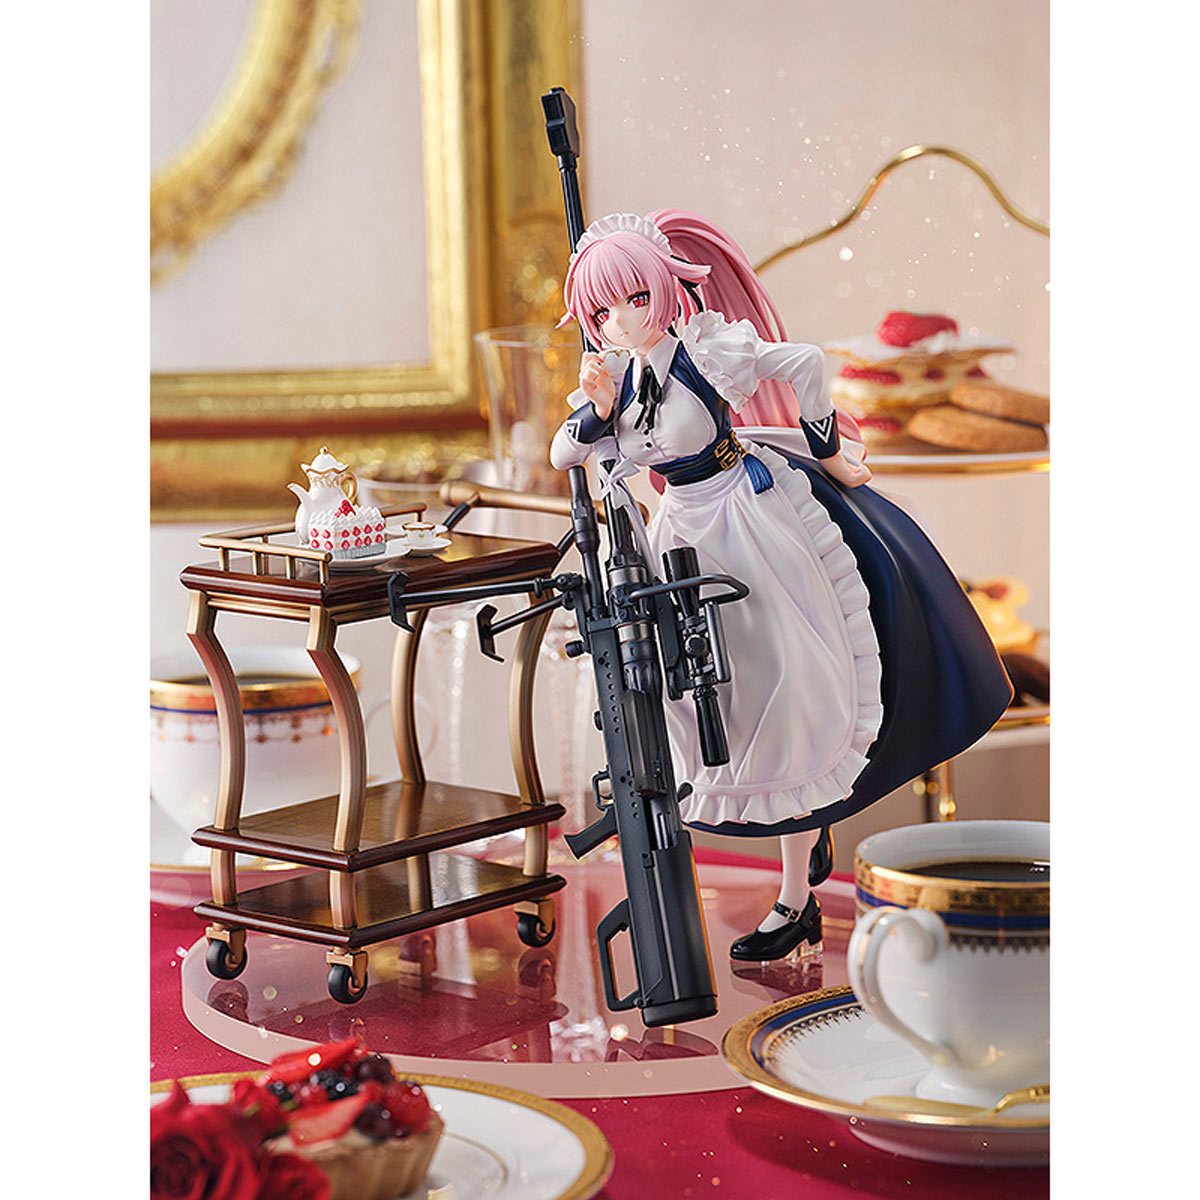 Girls' Frontline - NTW-20: Aristocrat Experience 1/6th Scale Statue Pony Canyon